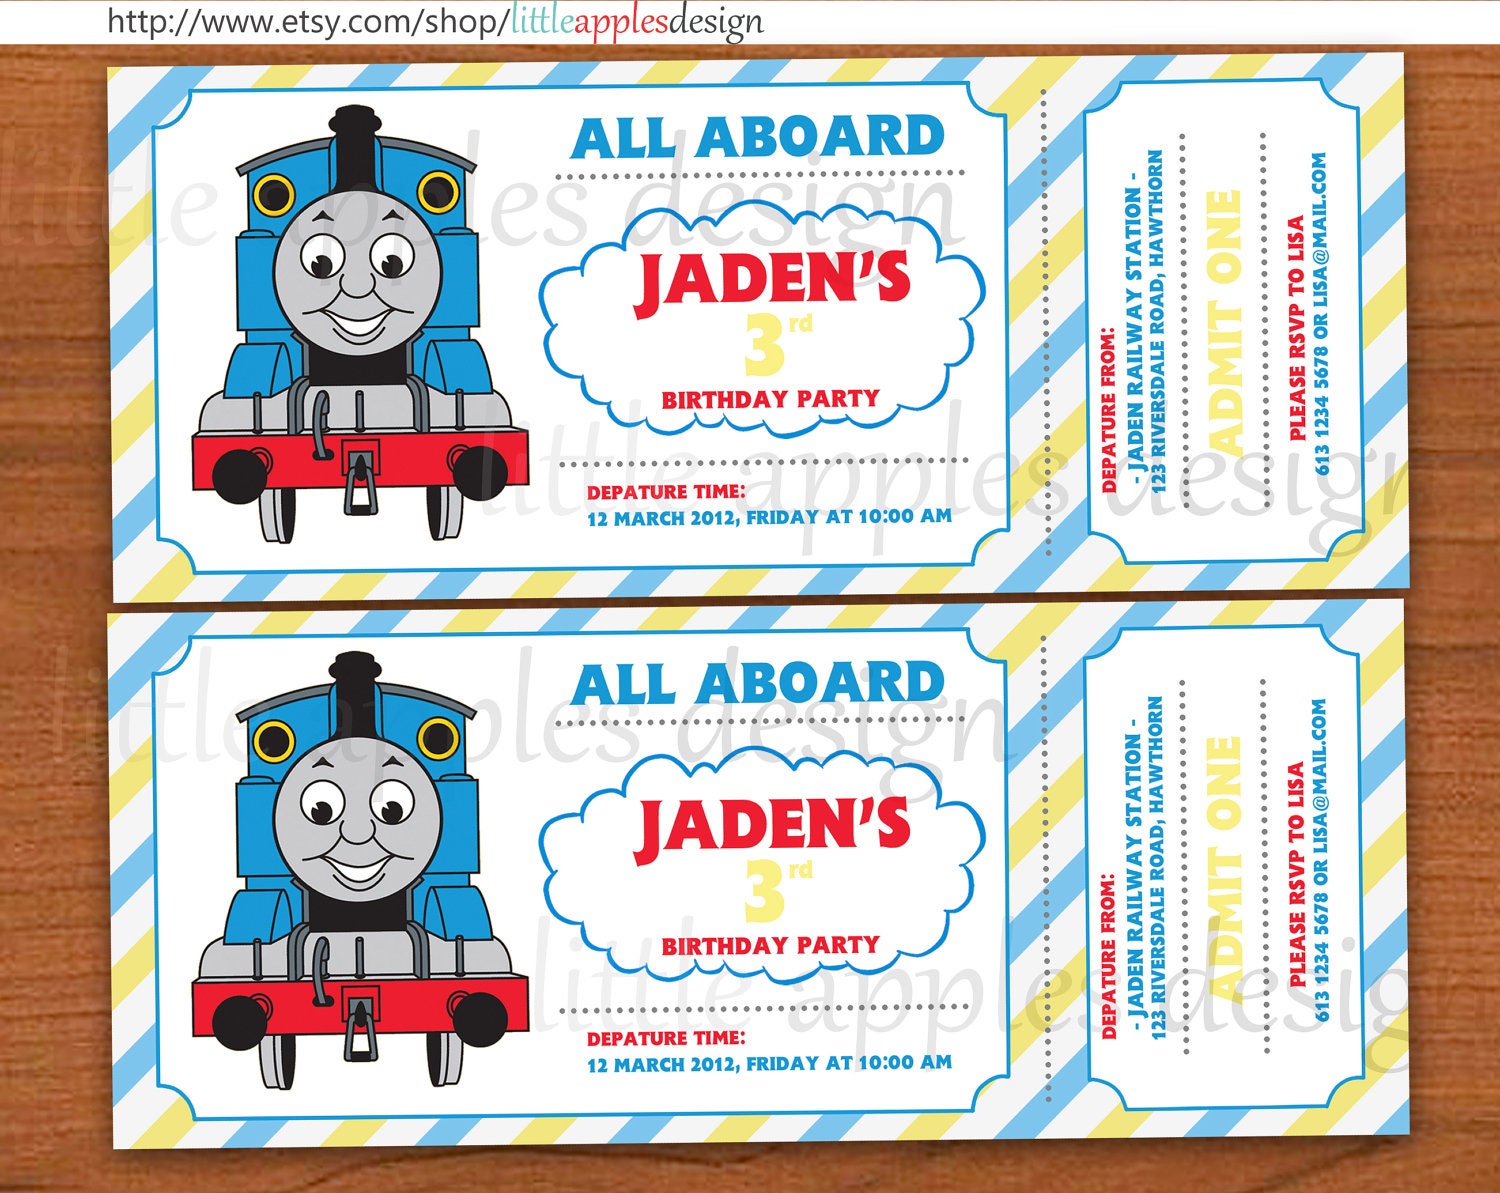 Thomas and friends Birthday Invitation by Little Apples Design